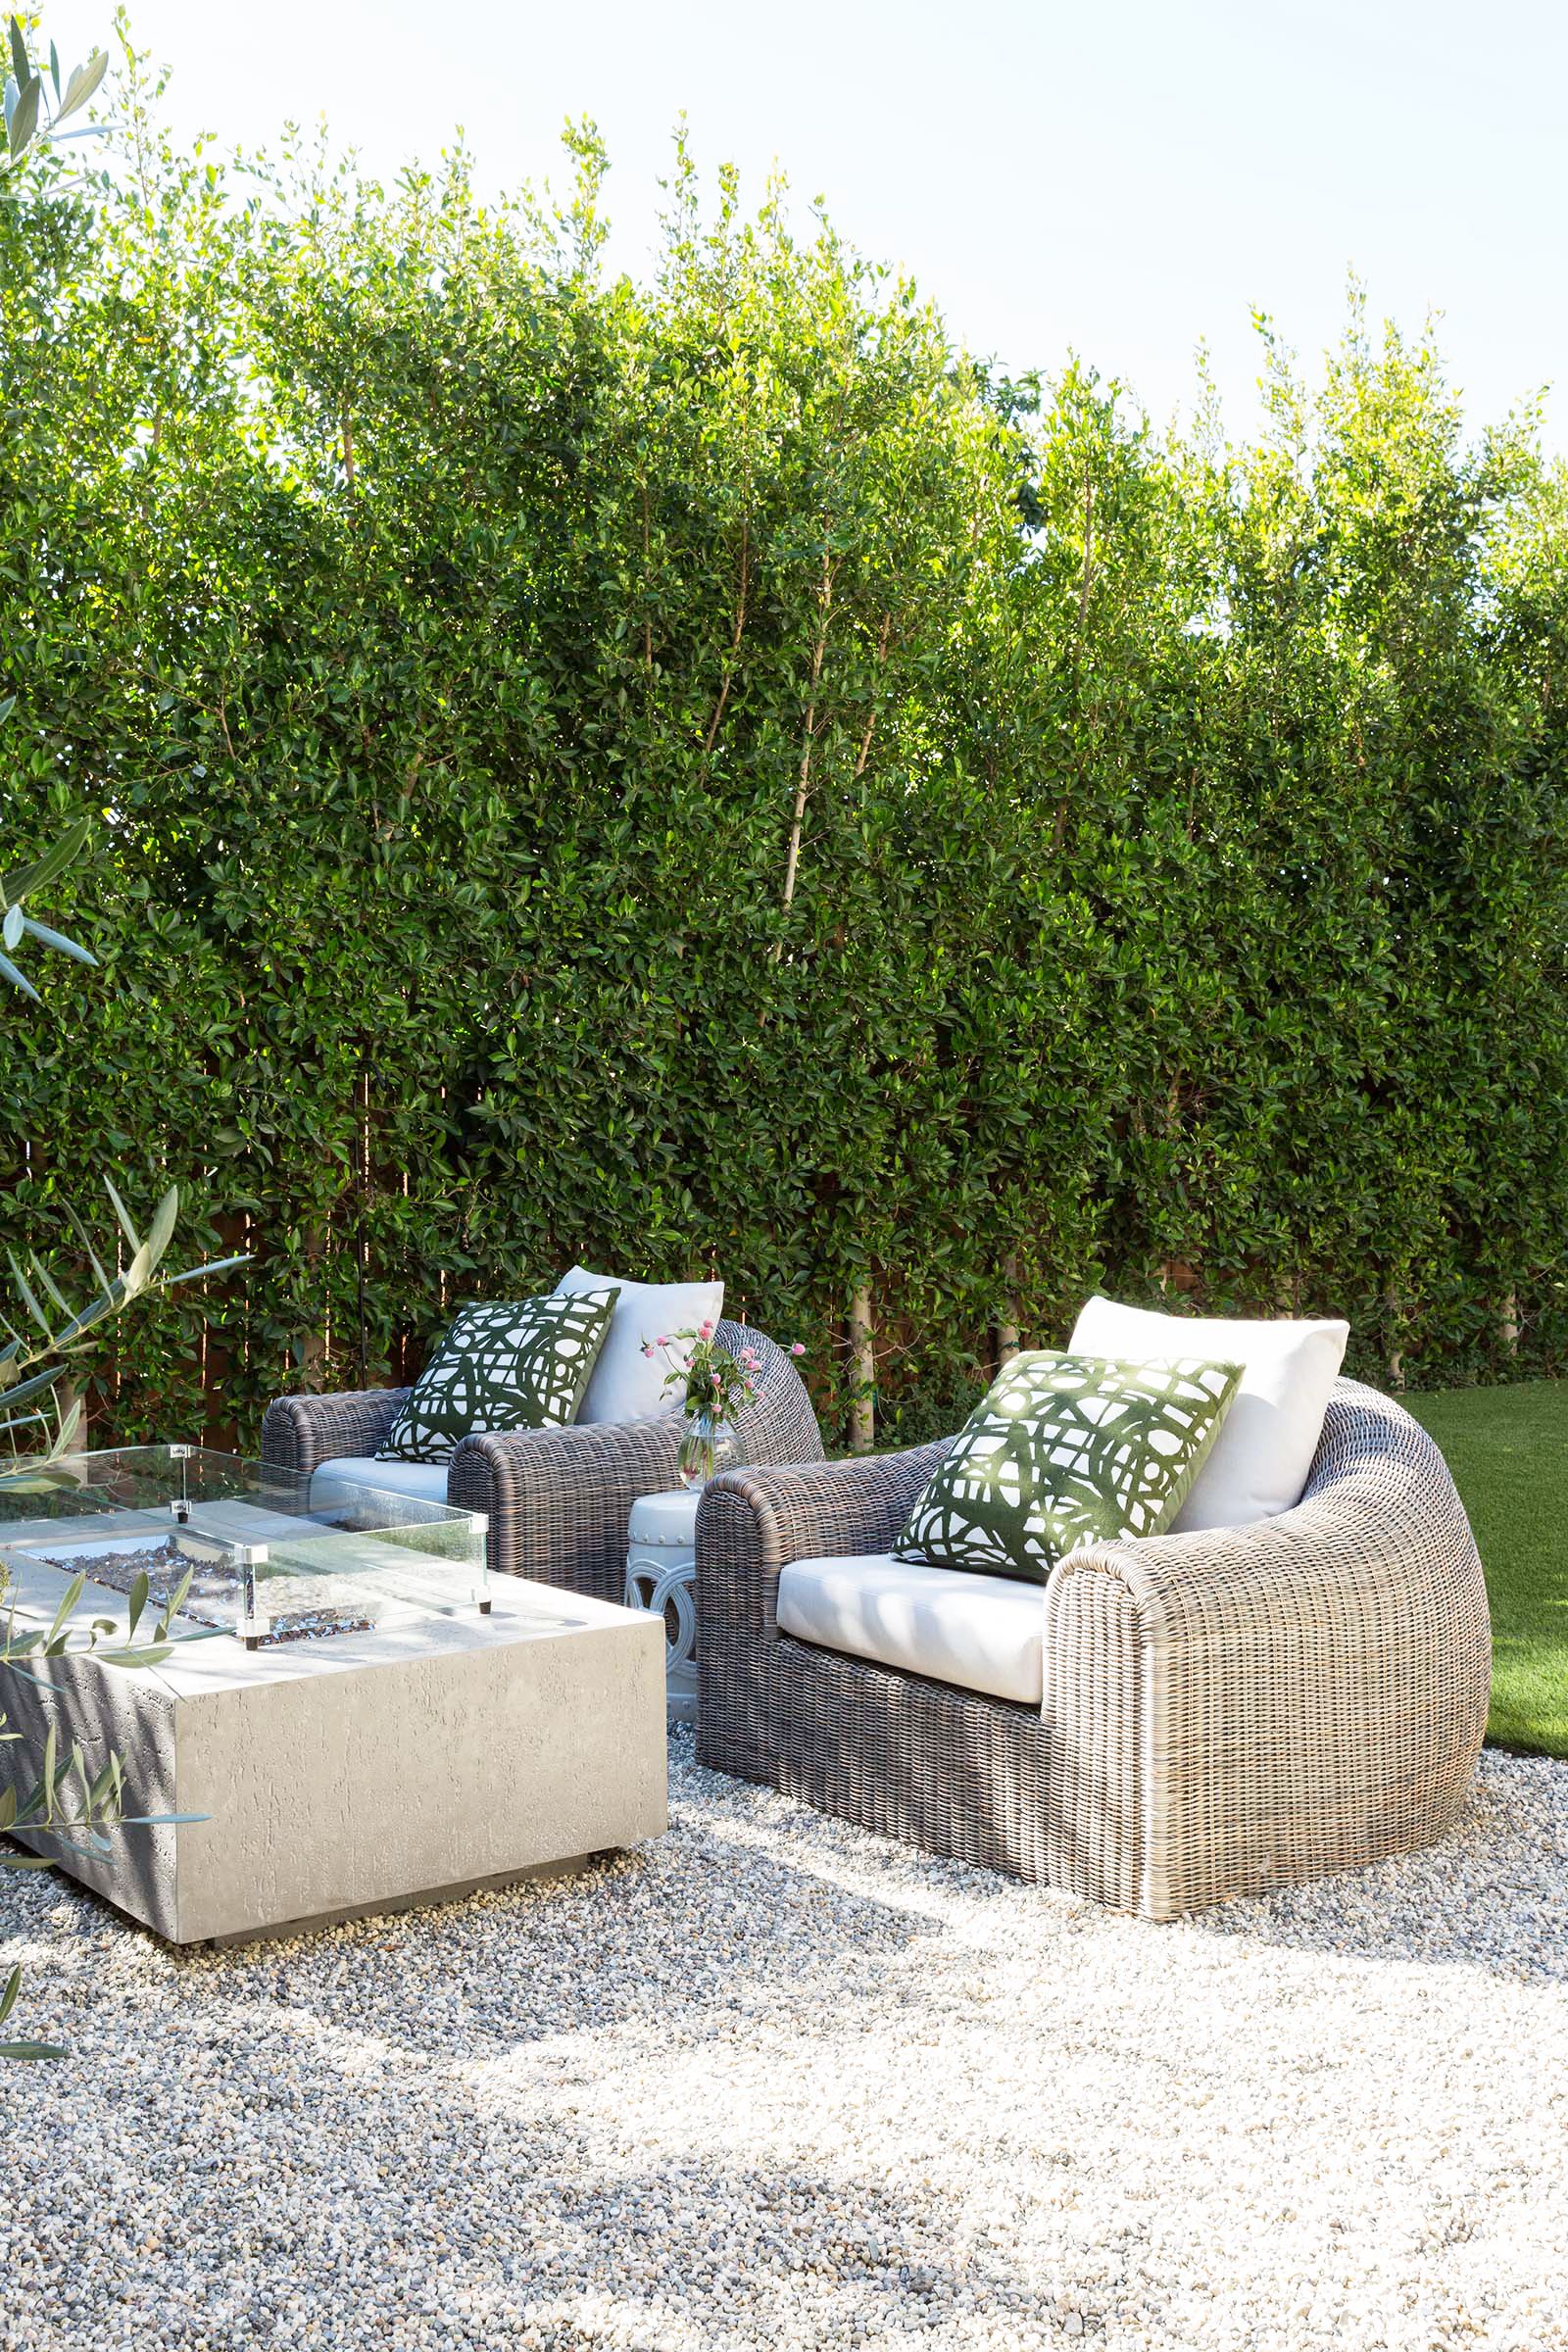 6 Fire Pit Ideas for Your Outdoor Space